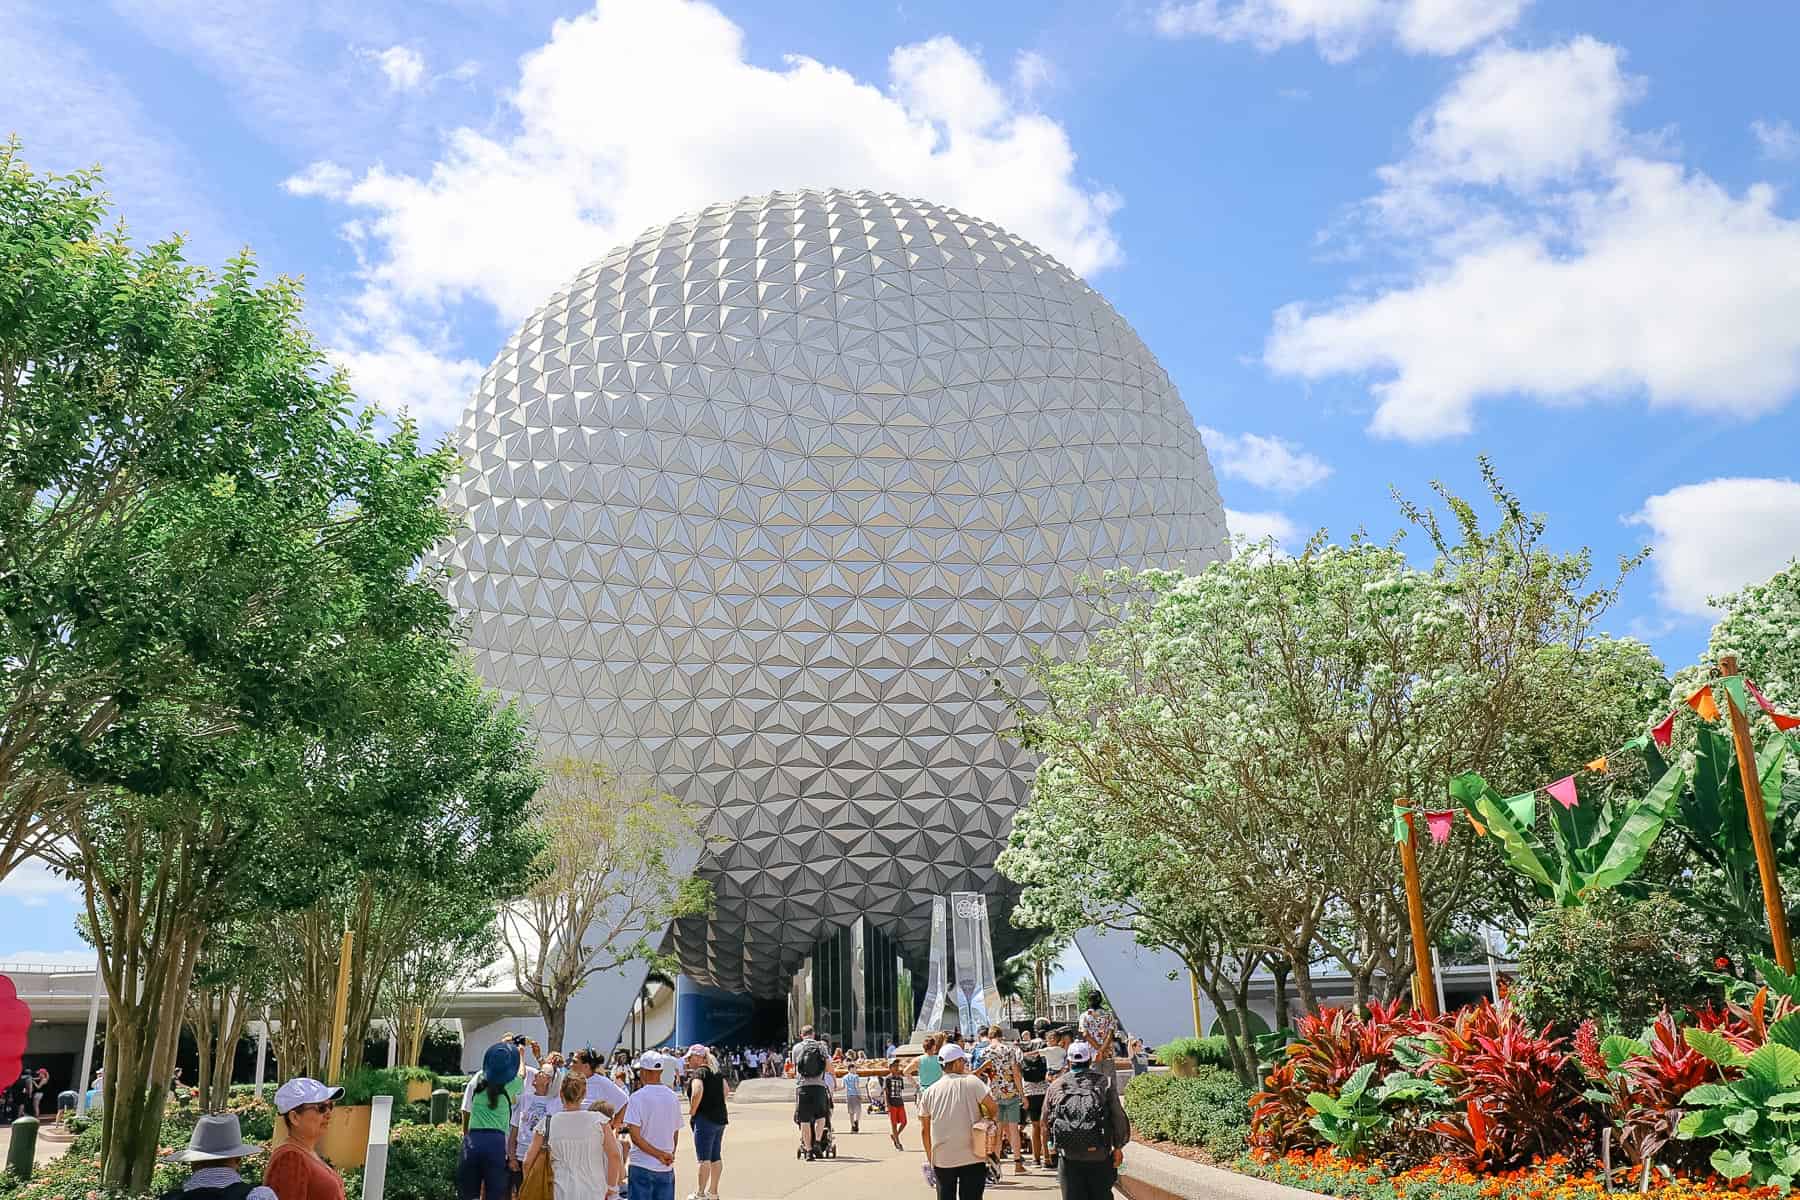 the entrance to Epcot